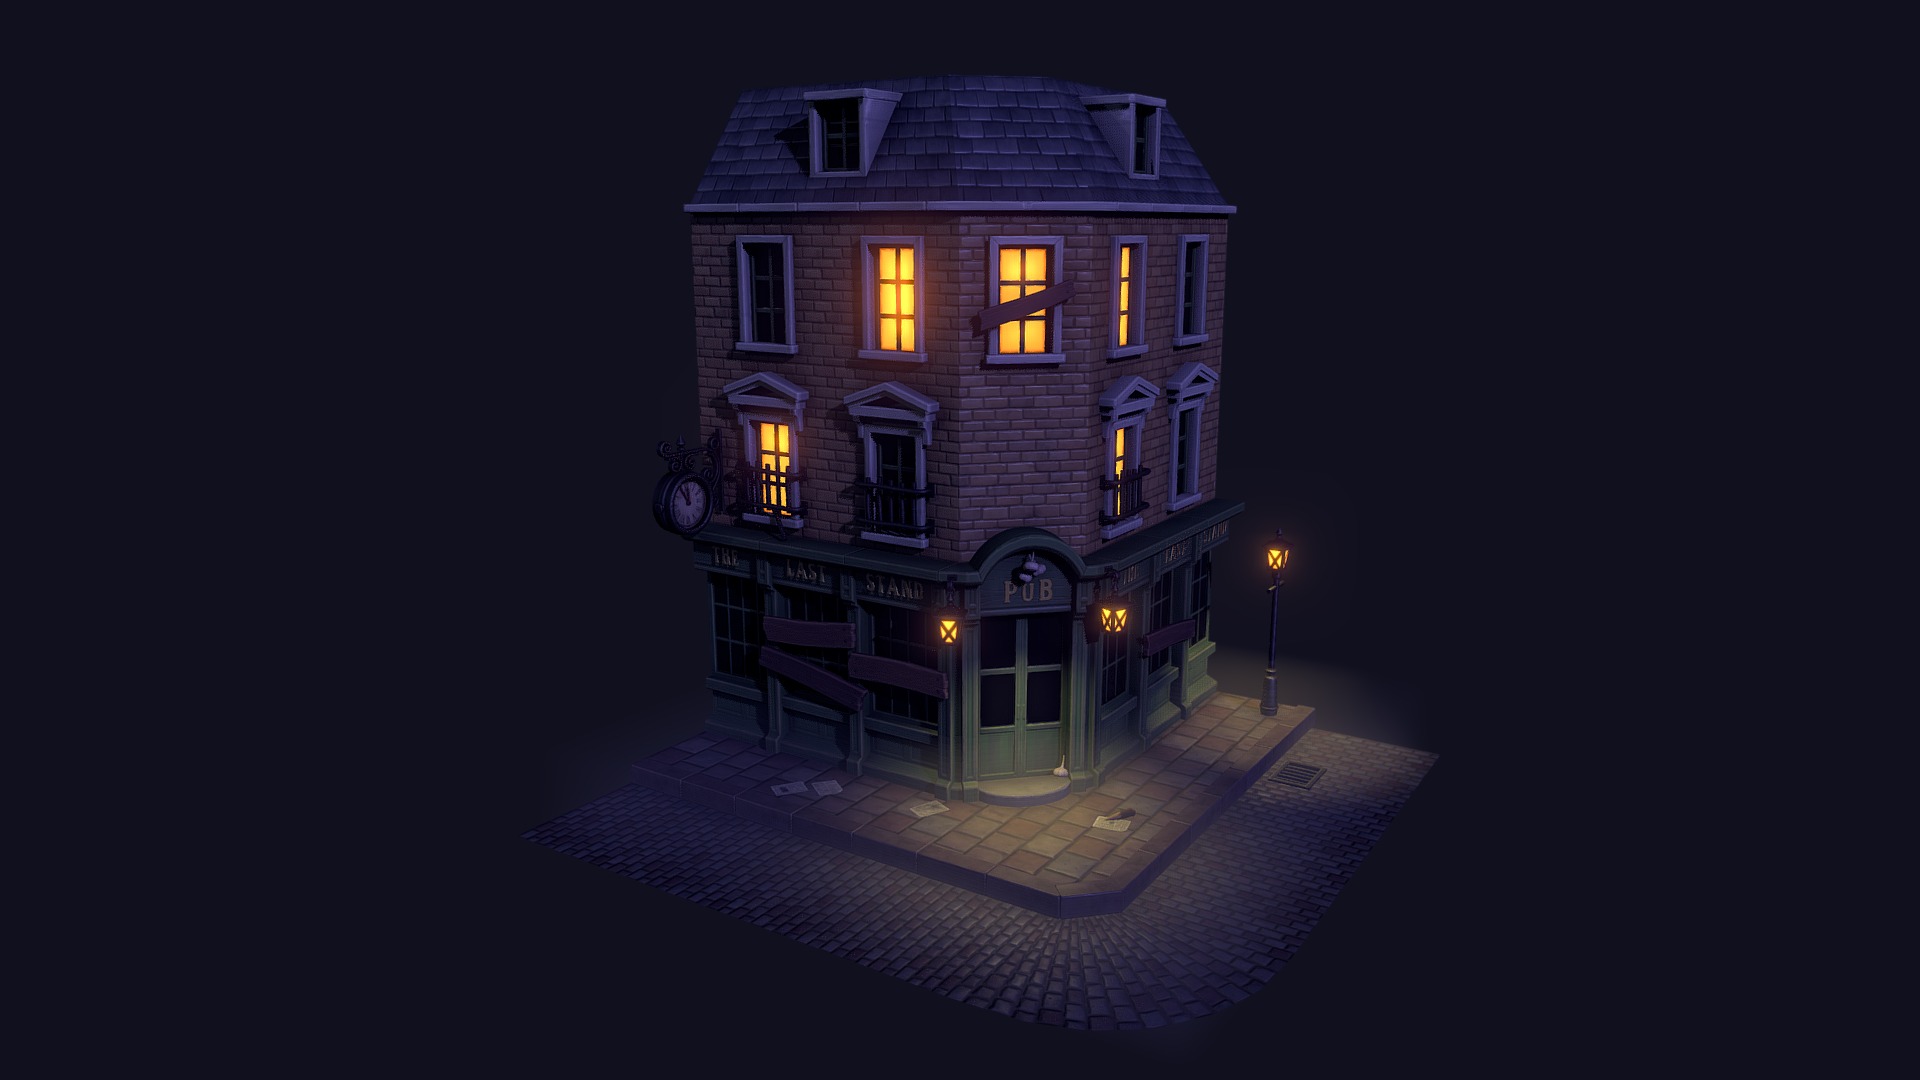 A stylized victorian pub that depicts the scene of &ldquo;the last stand